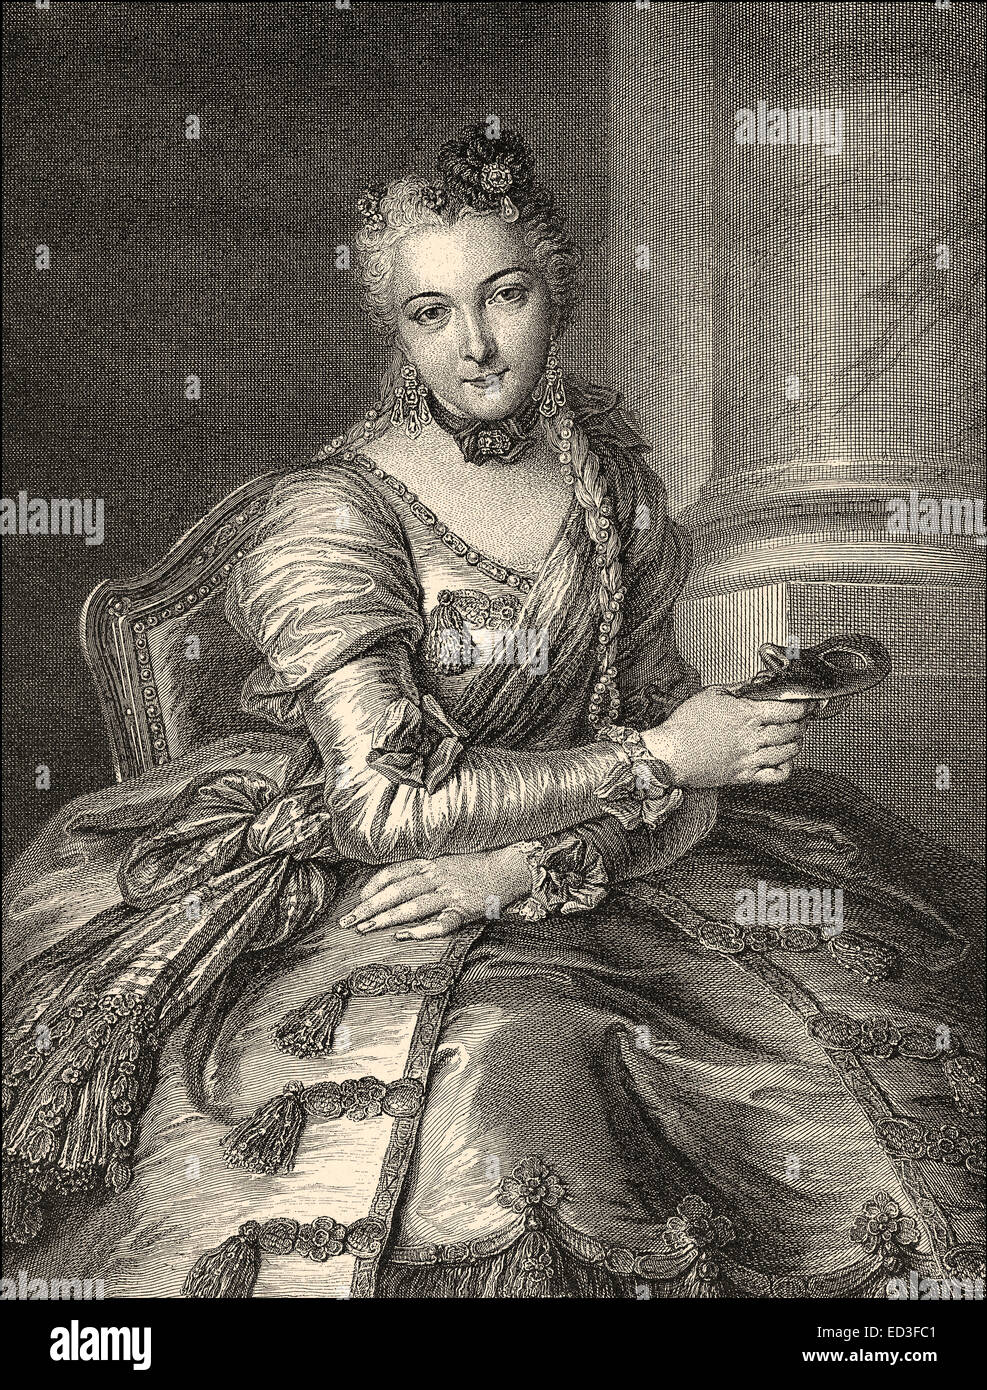 Anne-Claude-Louise d'Arpajon, Madame de Mouchy, 1729 - 1794, the first lady-in-waiting of the French Queen Marie Antoinette, Ann Stock Photo